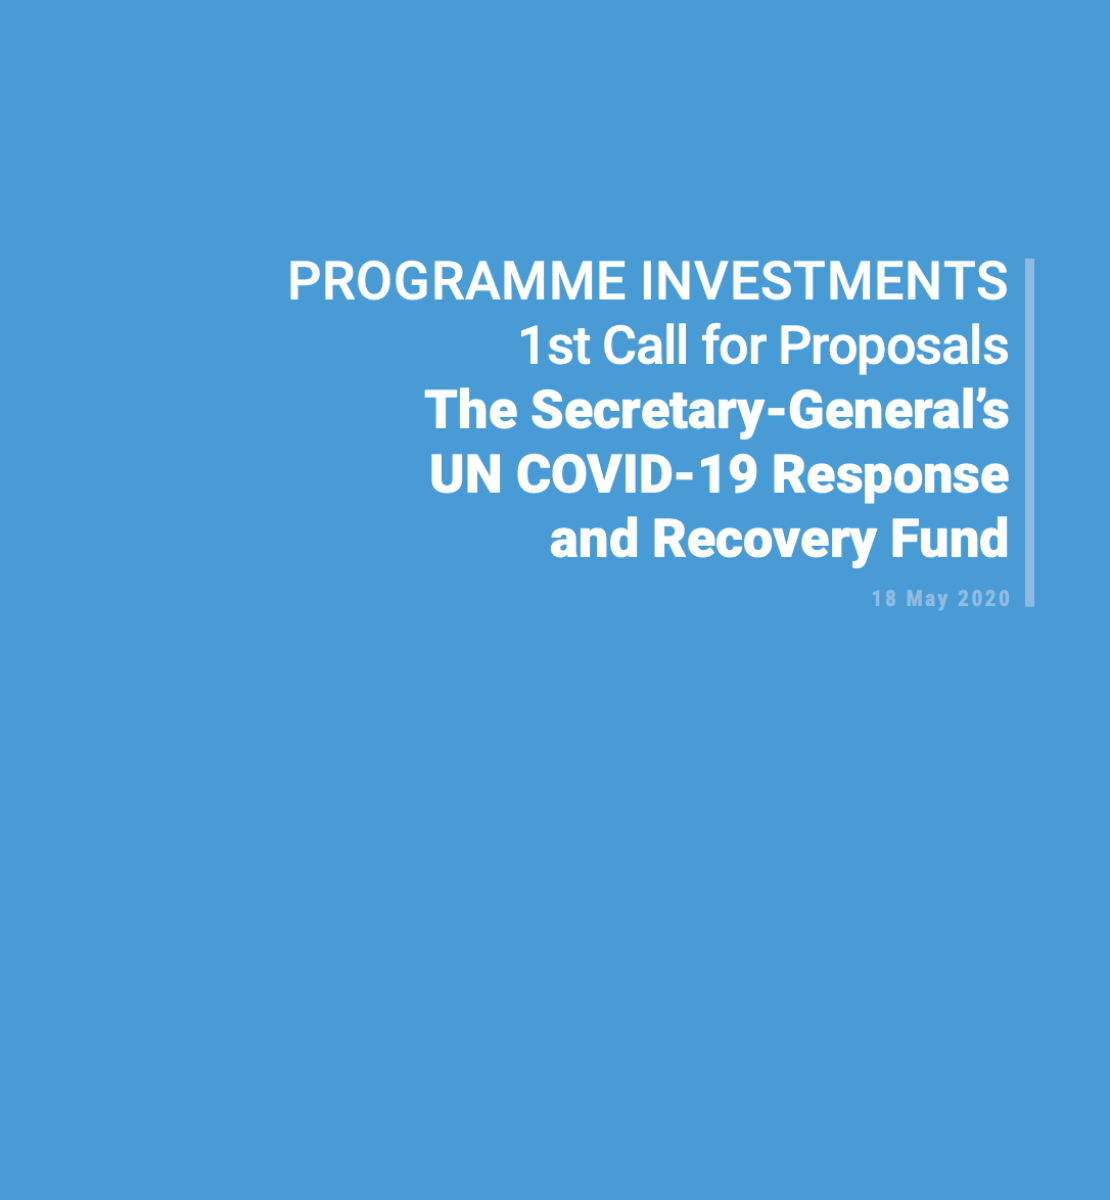 A blue cover with the words: PROGRAMME INVESTMENTS 1st Call for Proposals The Secretary-General’s UN COVID-19 Response and Recovery Fund